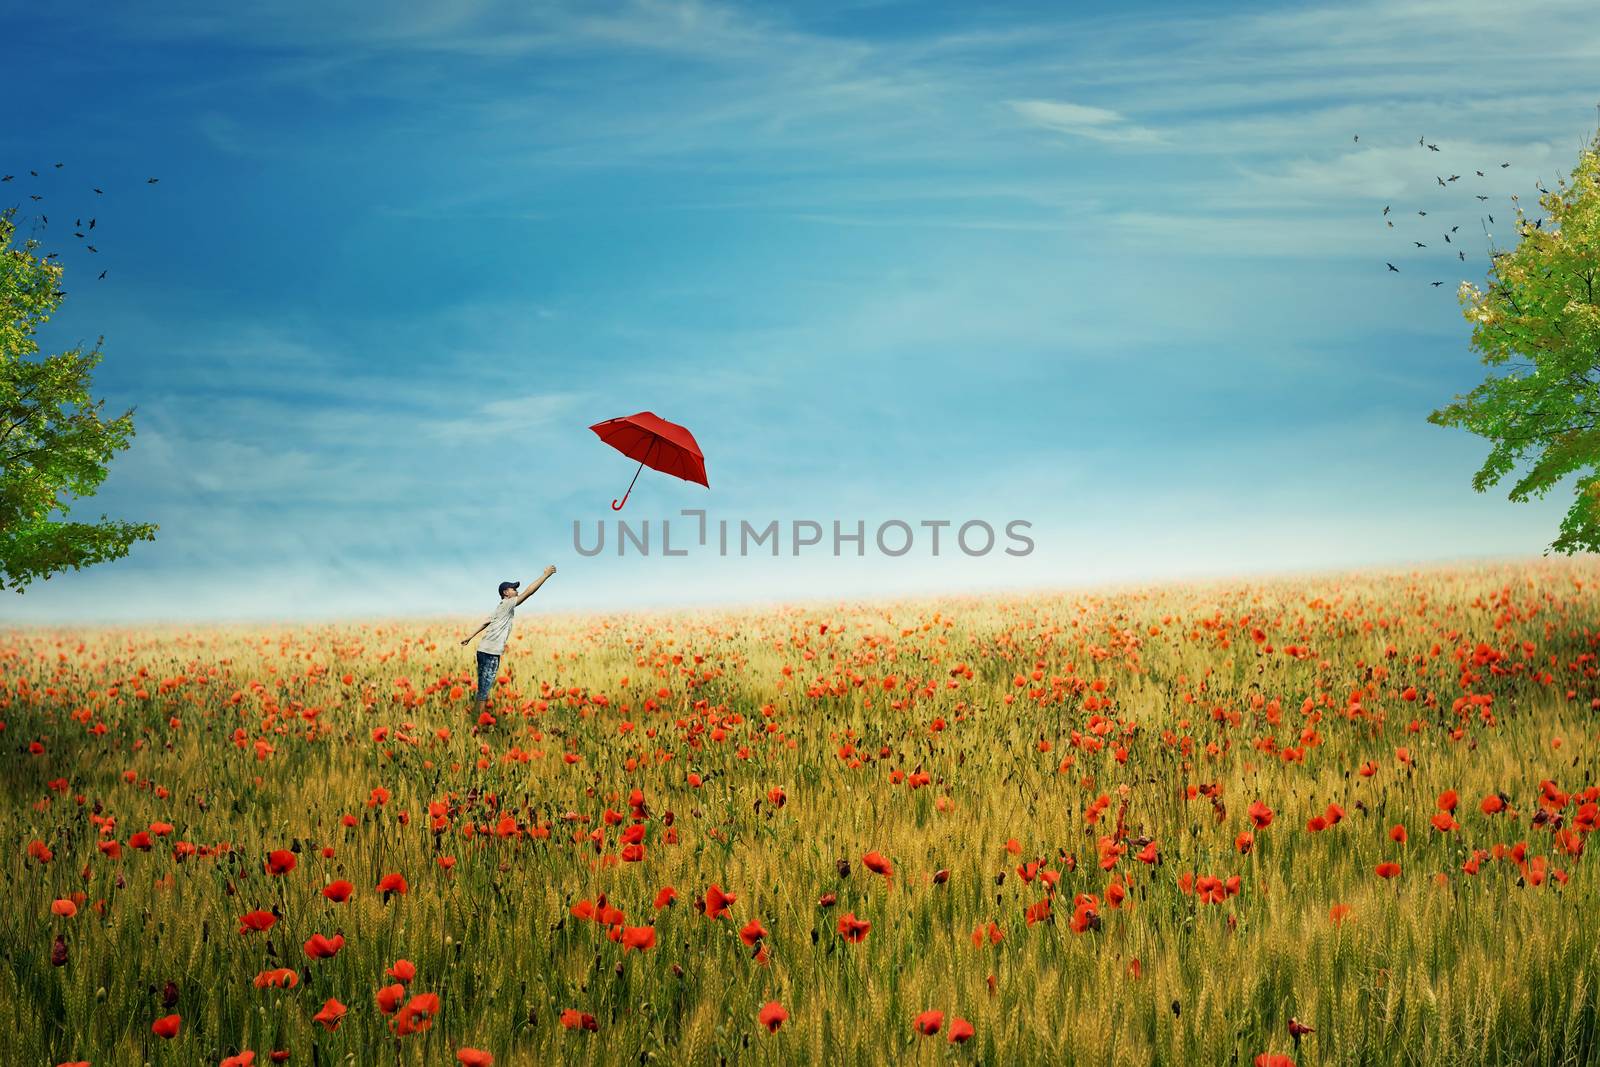 Young boy stand on a country meadow with million of red poppies, trying to catch his red umbrella that fly to the sky. The pursuit of happiness and success concept. Life joy, fun and happiness.